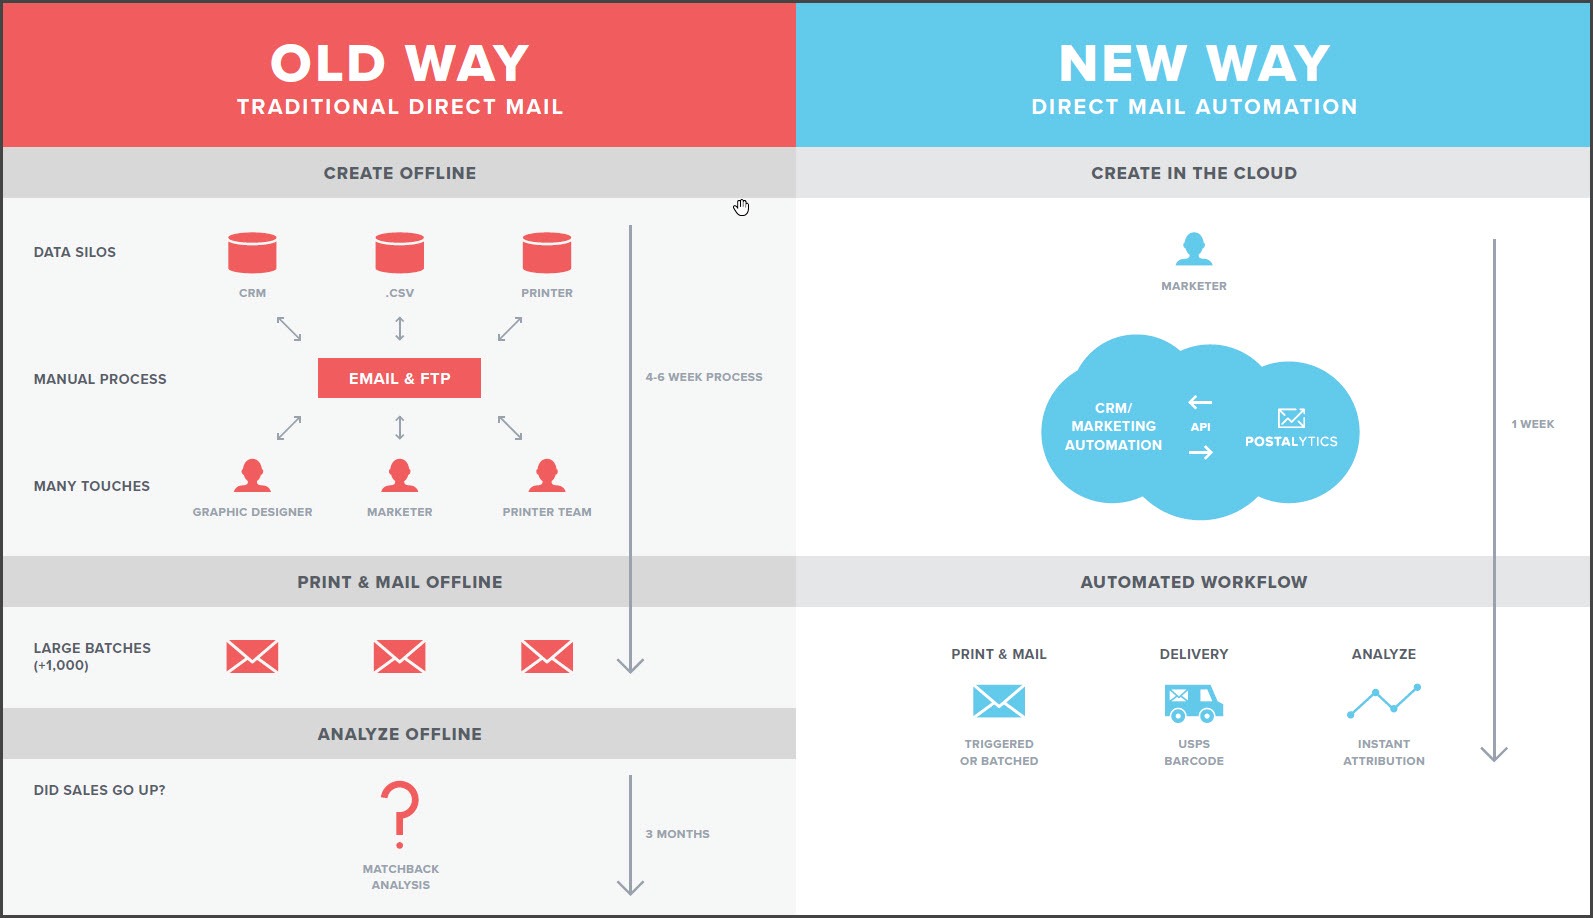 Direct Mail Services Comparison Guide - old way vs new way